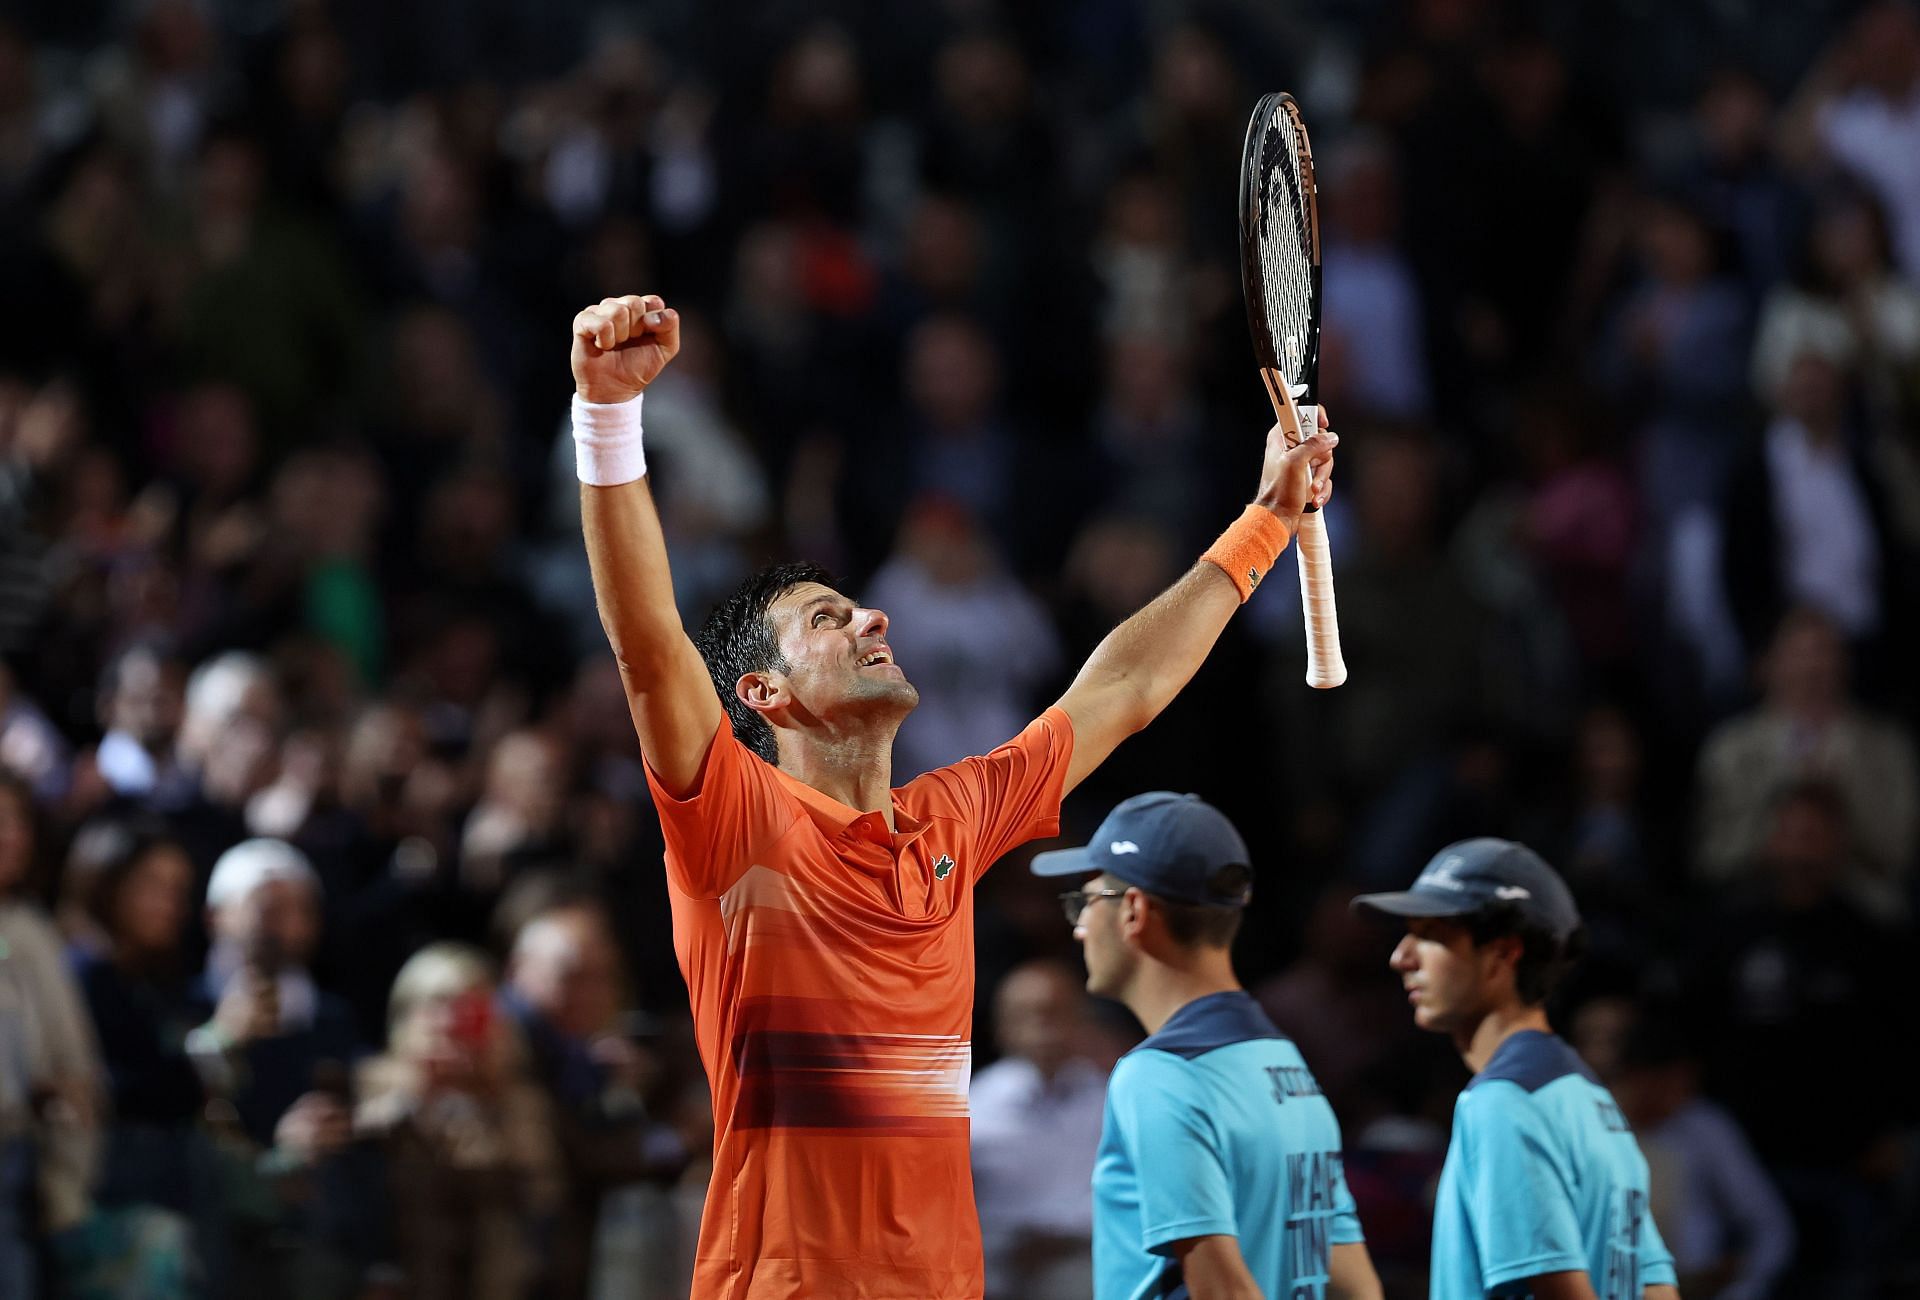 Djokovic got his 1000th victory at the 2022 Italian Open